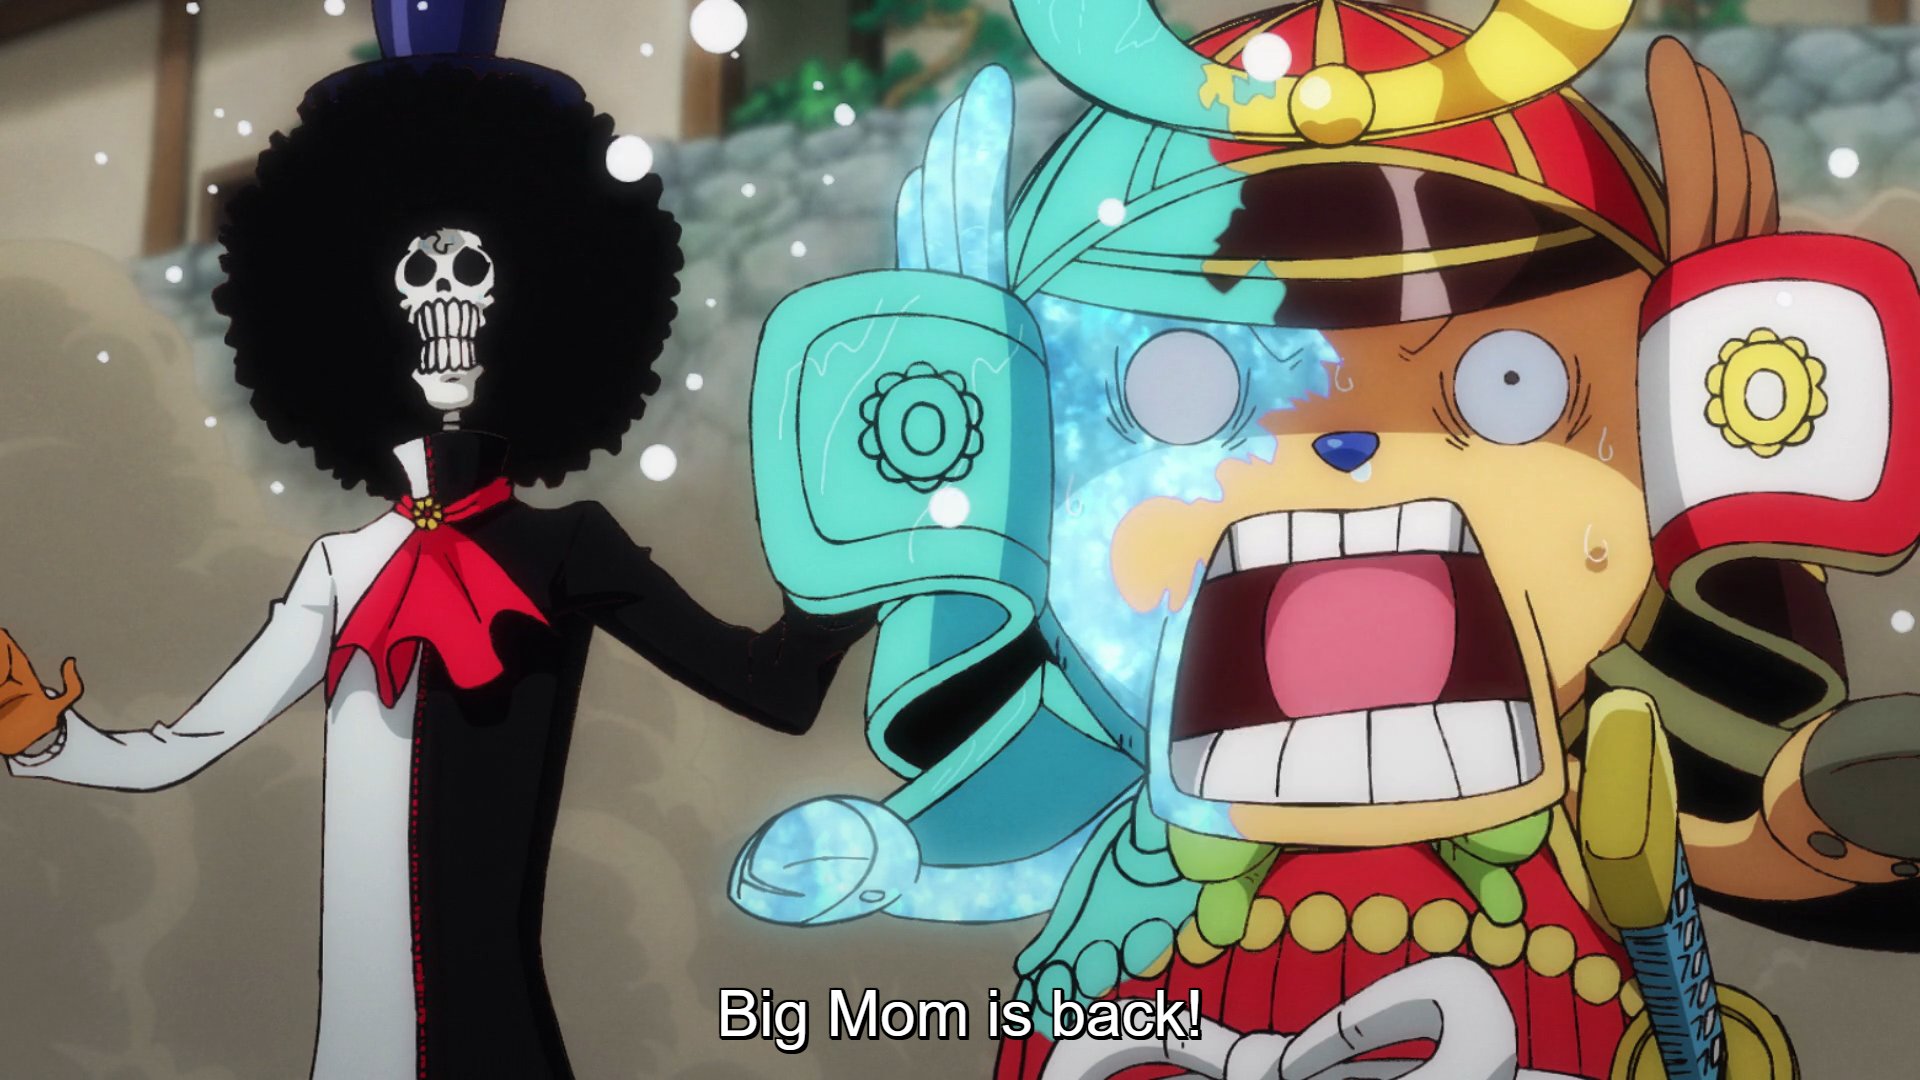 One Piece Things Just Keep Getting Worse And Worse Don T They Via Episode 1010 T Co Bvfn4kpk08 Twitter